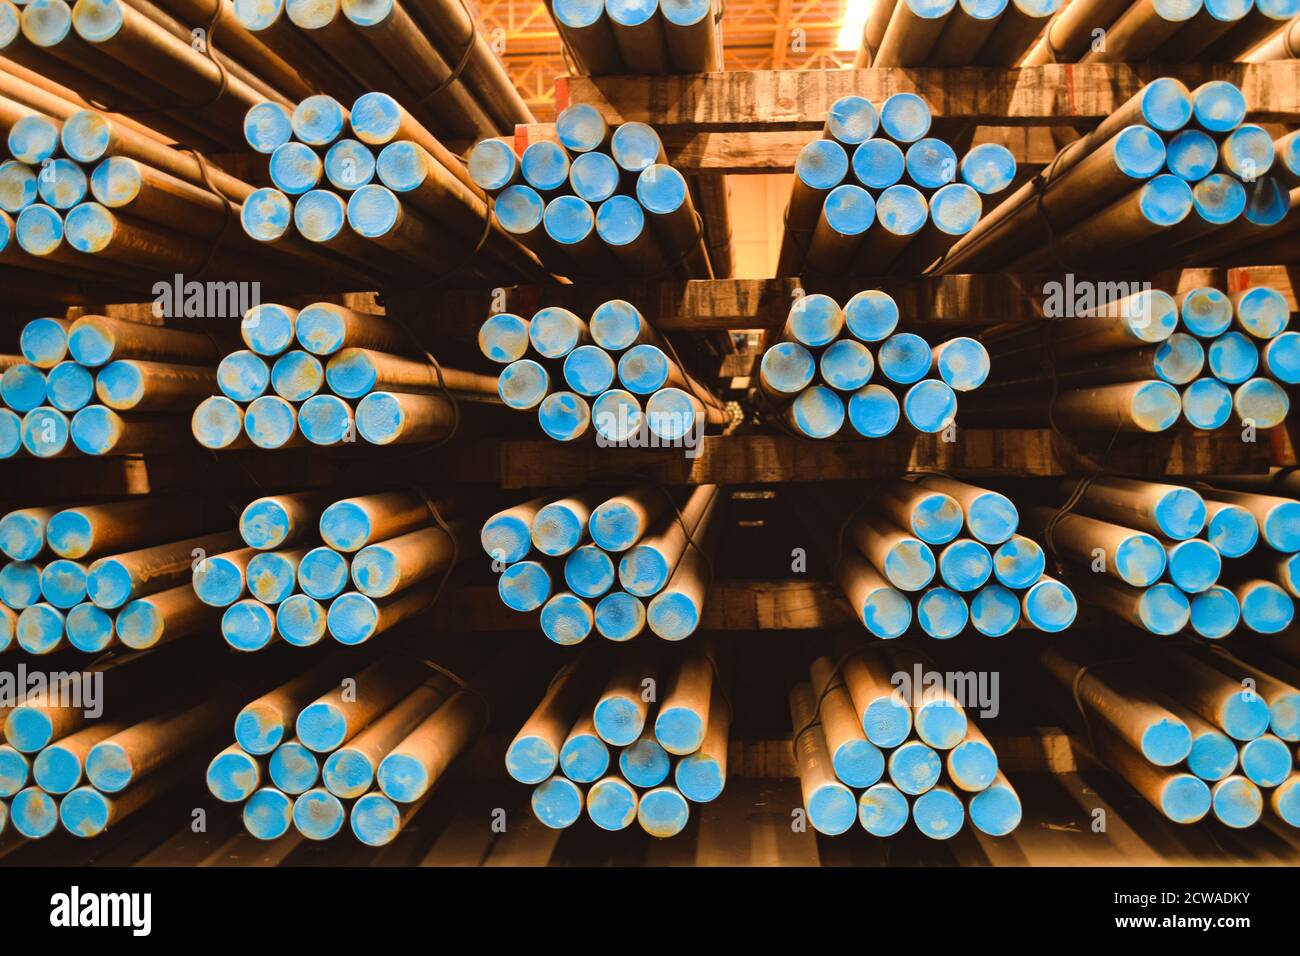 Pack of steel round bar stack in layer inside large distribution warehouse. Steel warehouse logistics operations. Stock Photo